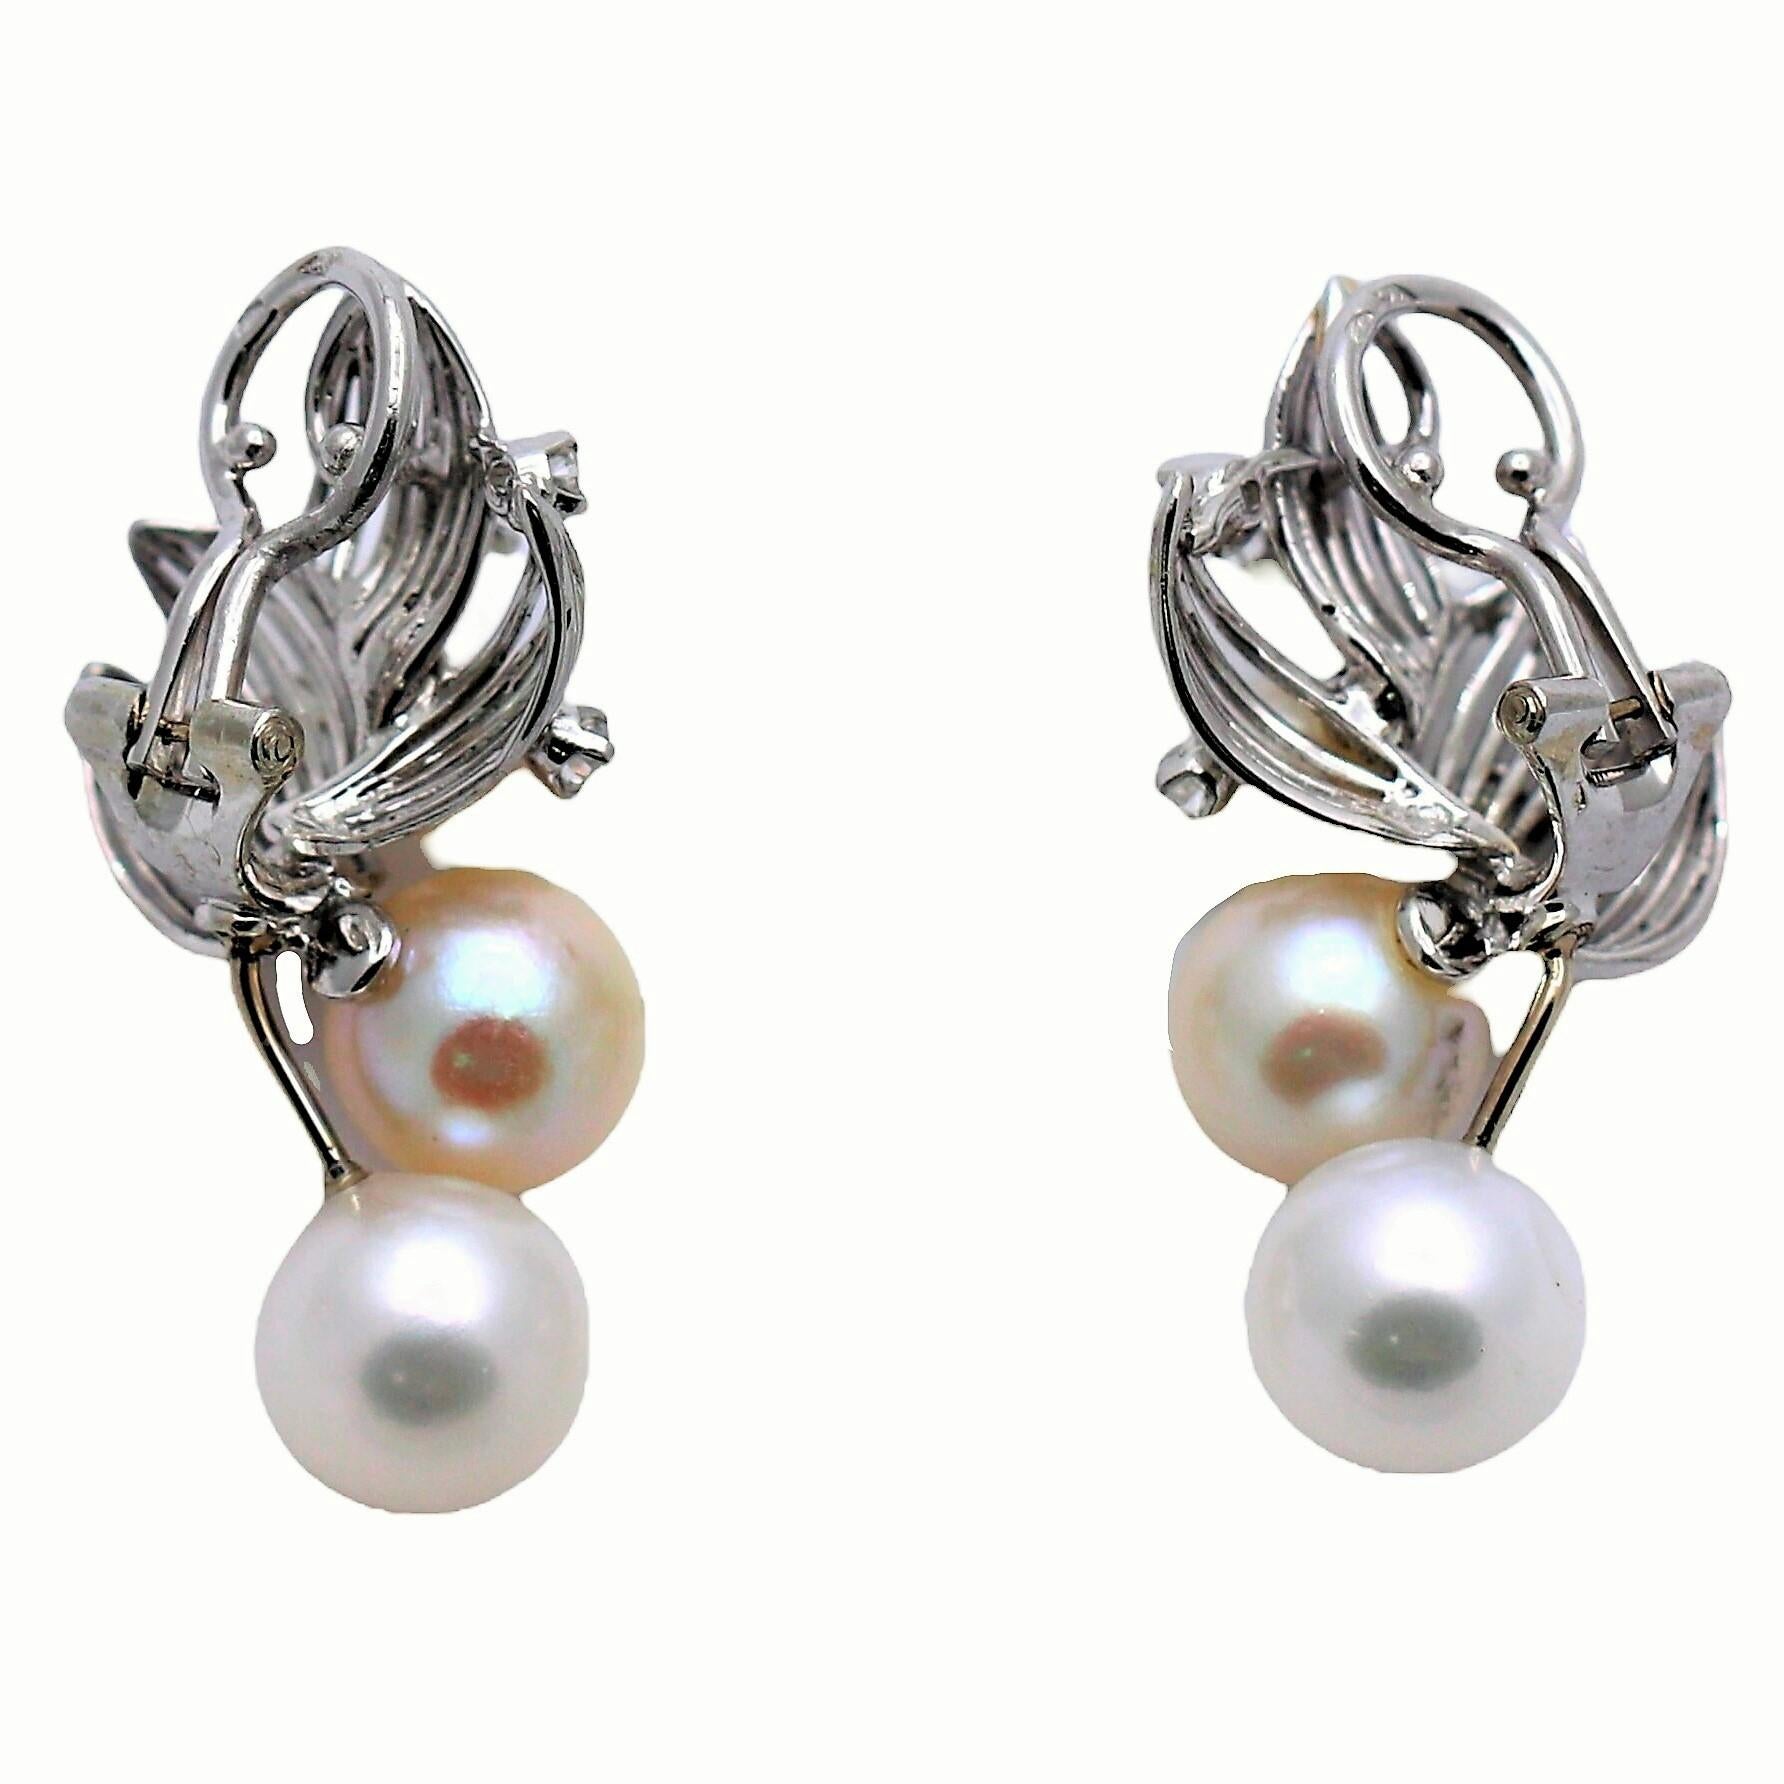 Modern French Mid-20th Century 18K White Gold, Pearl and Diamond Earrings For Sale